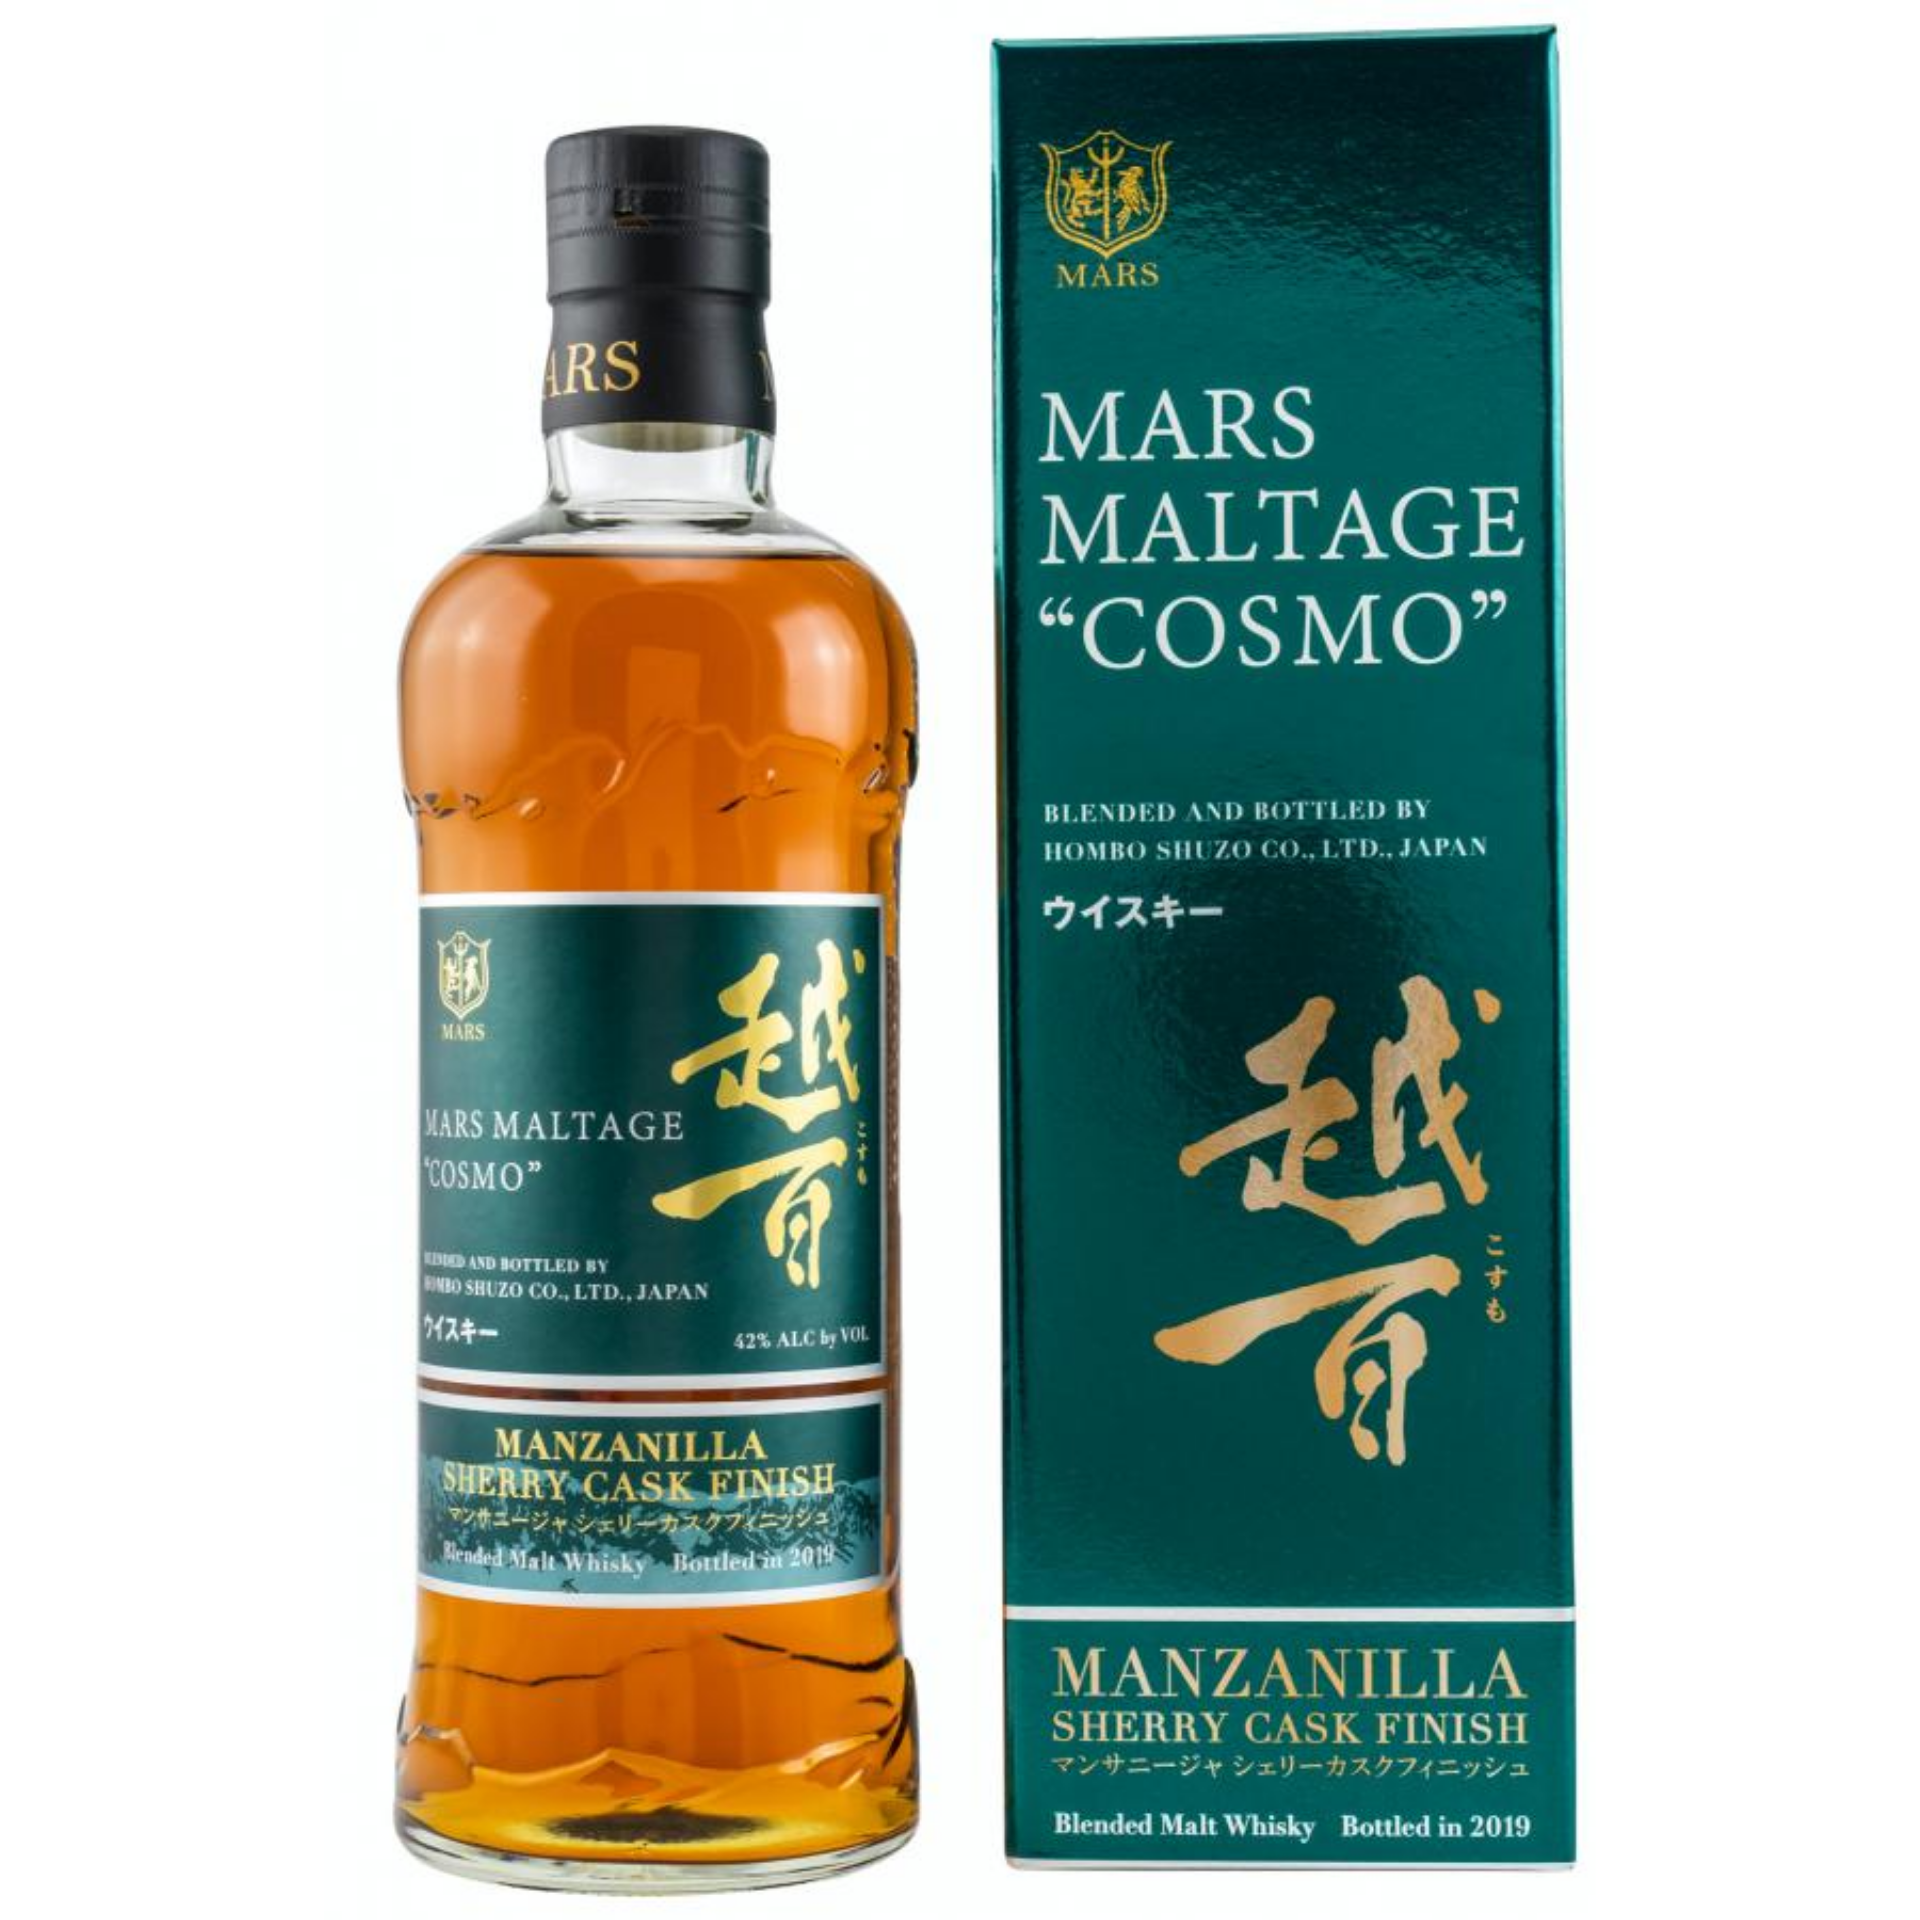 Mars Maltage "Cosmo" Manzanilla Sherry Cask Finish Blended Whisky 700ml